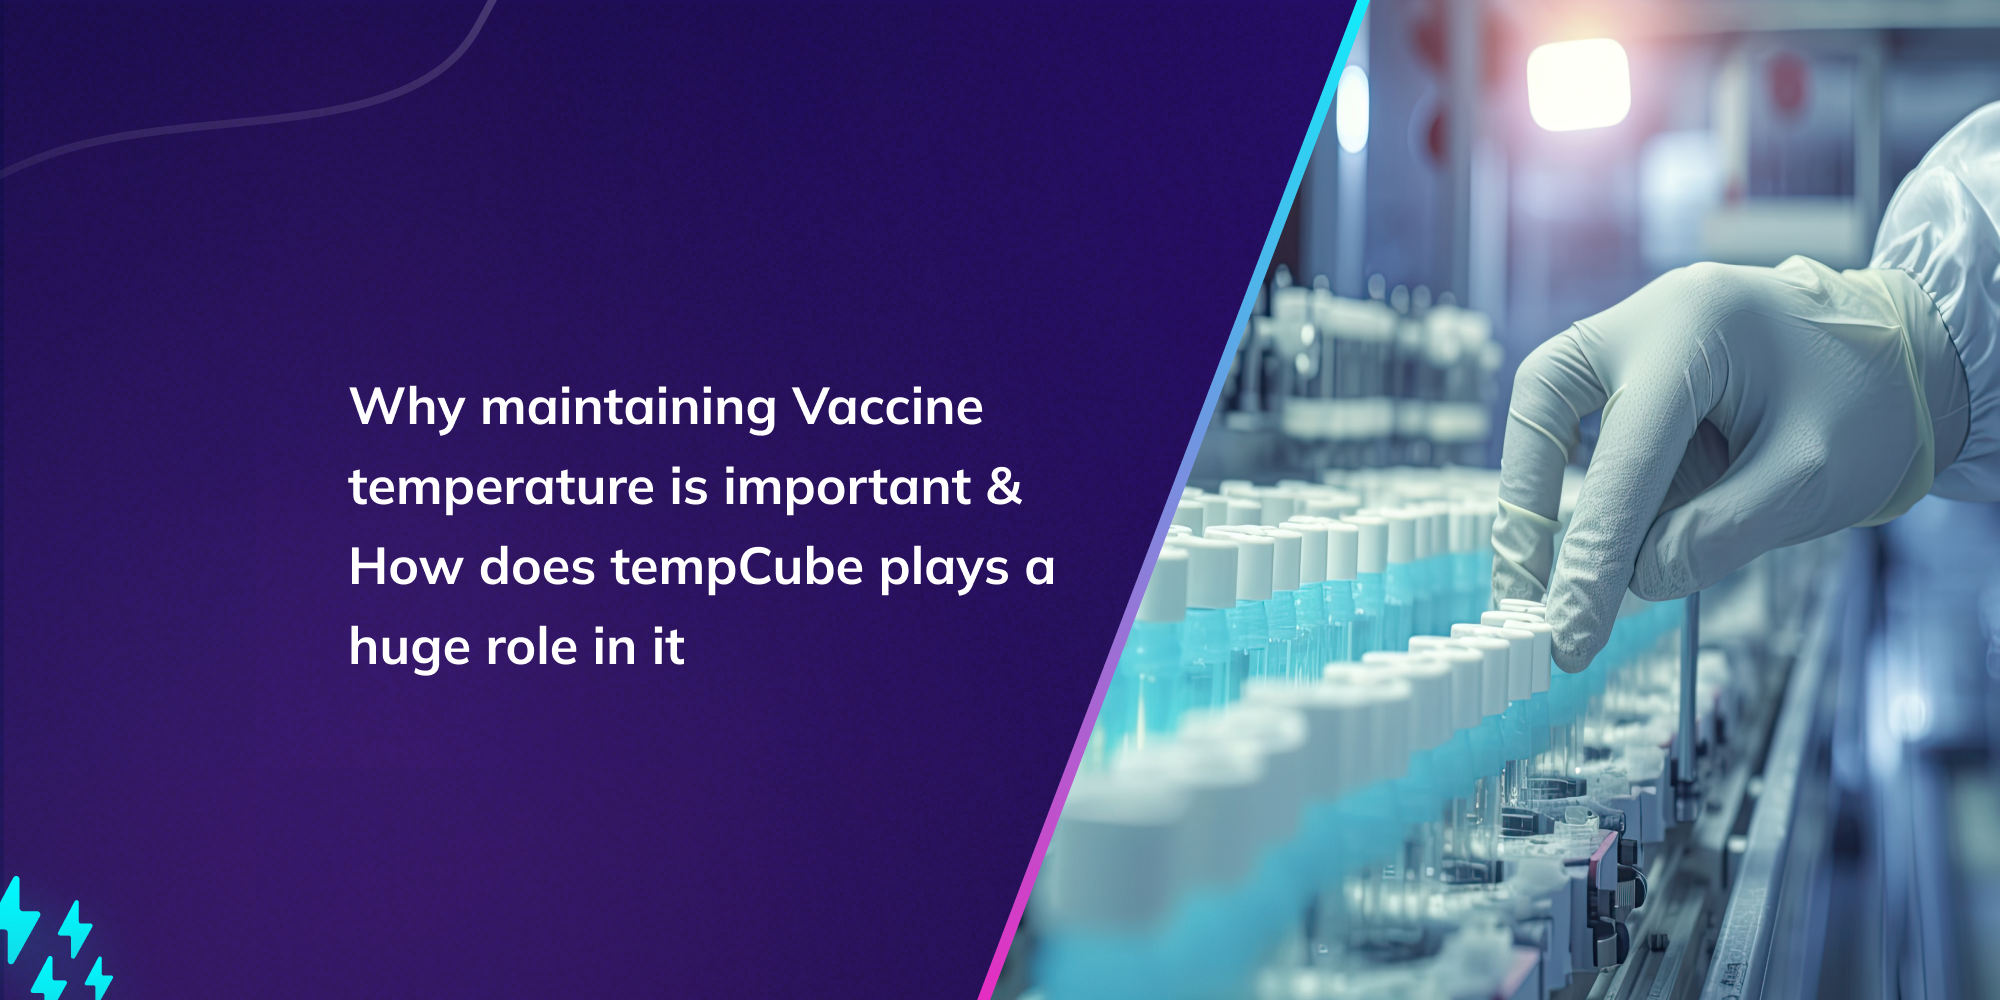 Why maintaining Vaccine temperature is important & How does tempCube plays a huge role in it